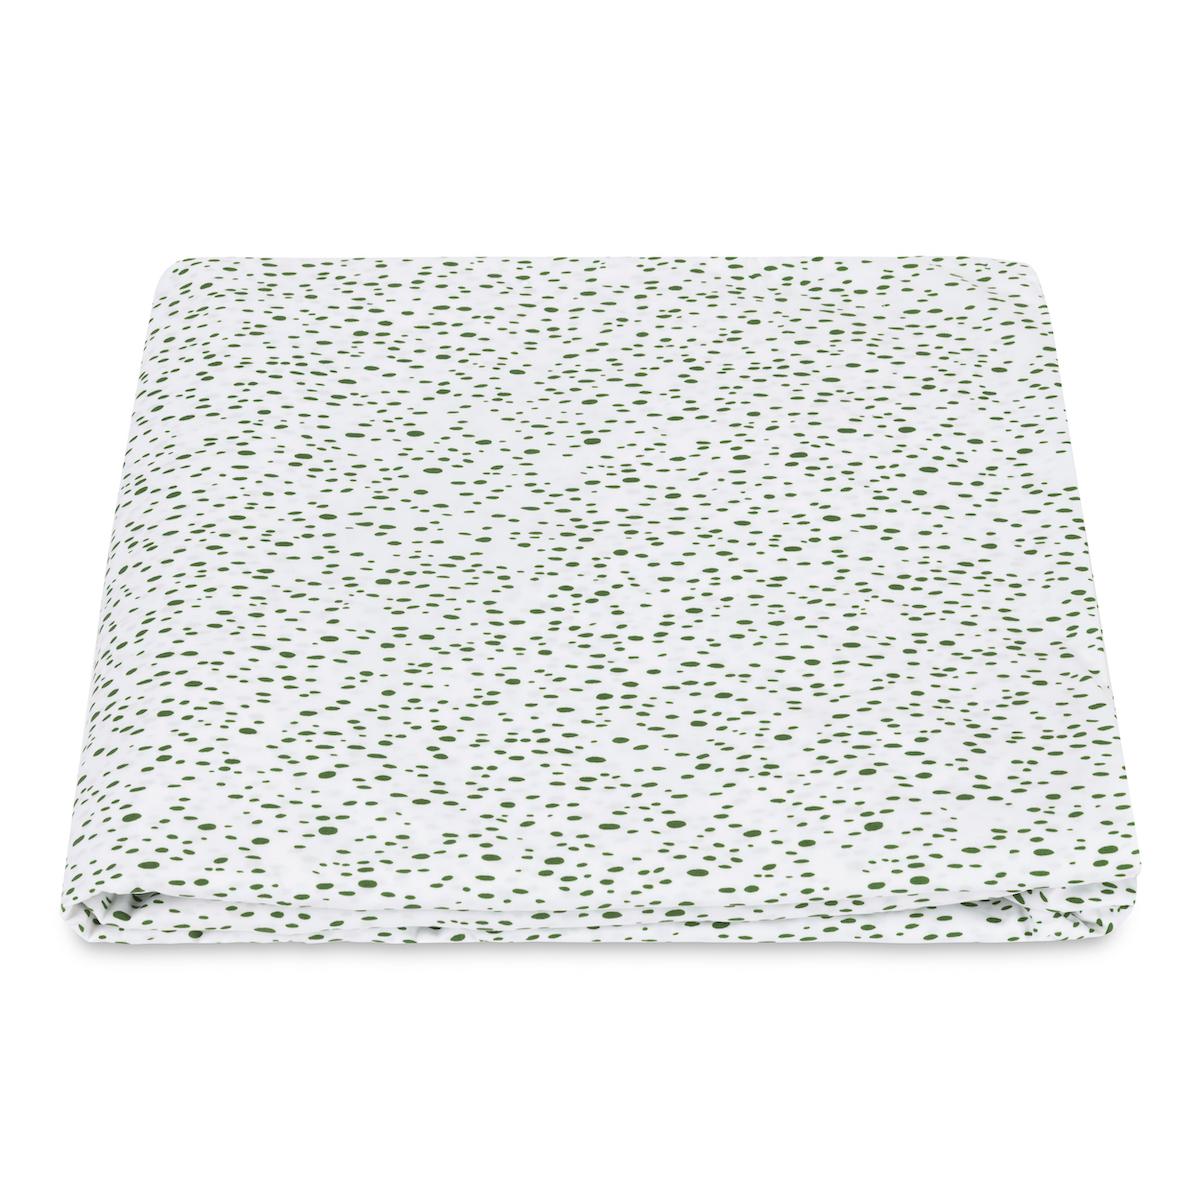 Celine Fitted Sheet_GRASS